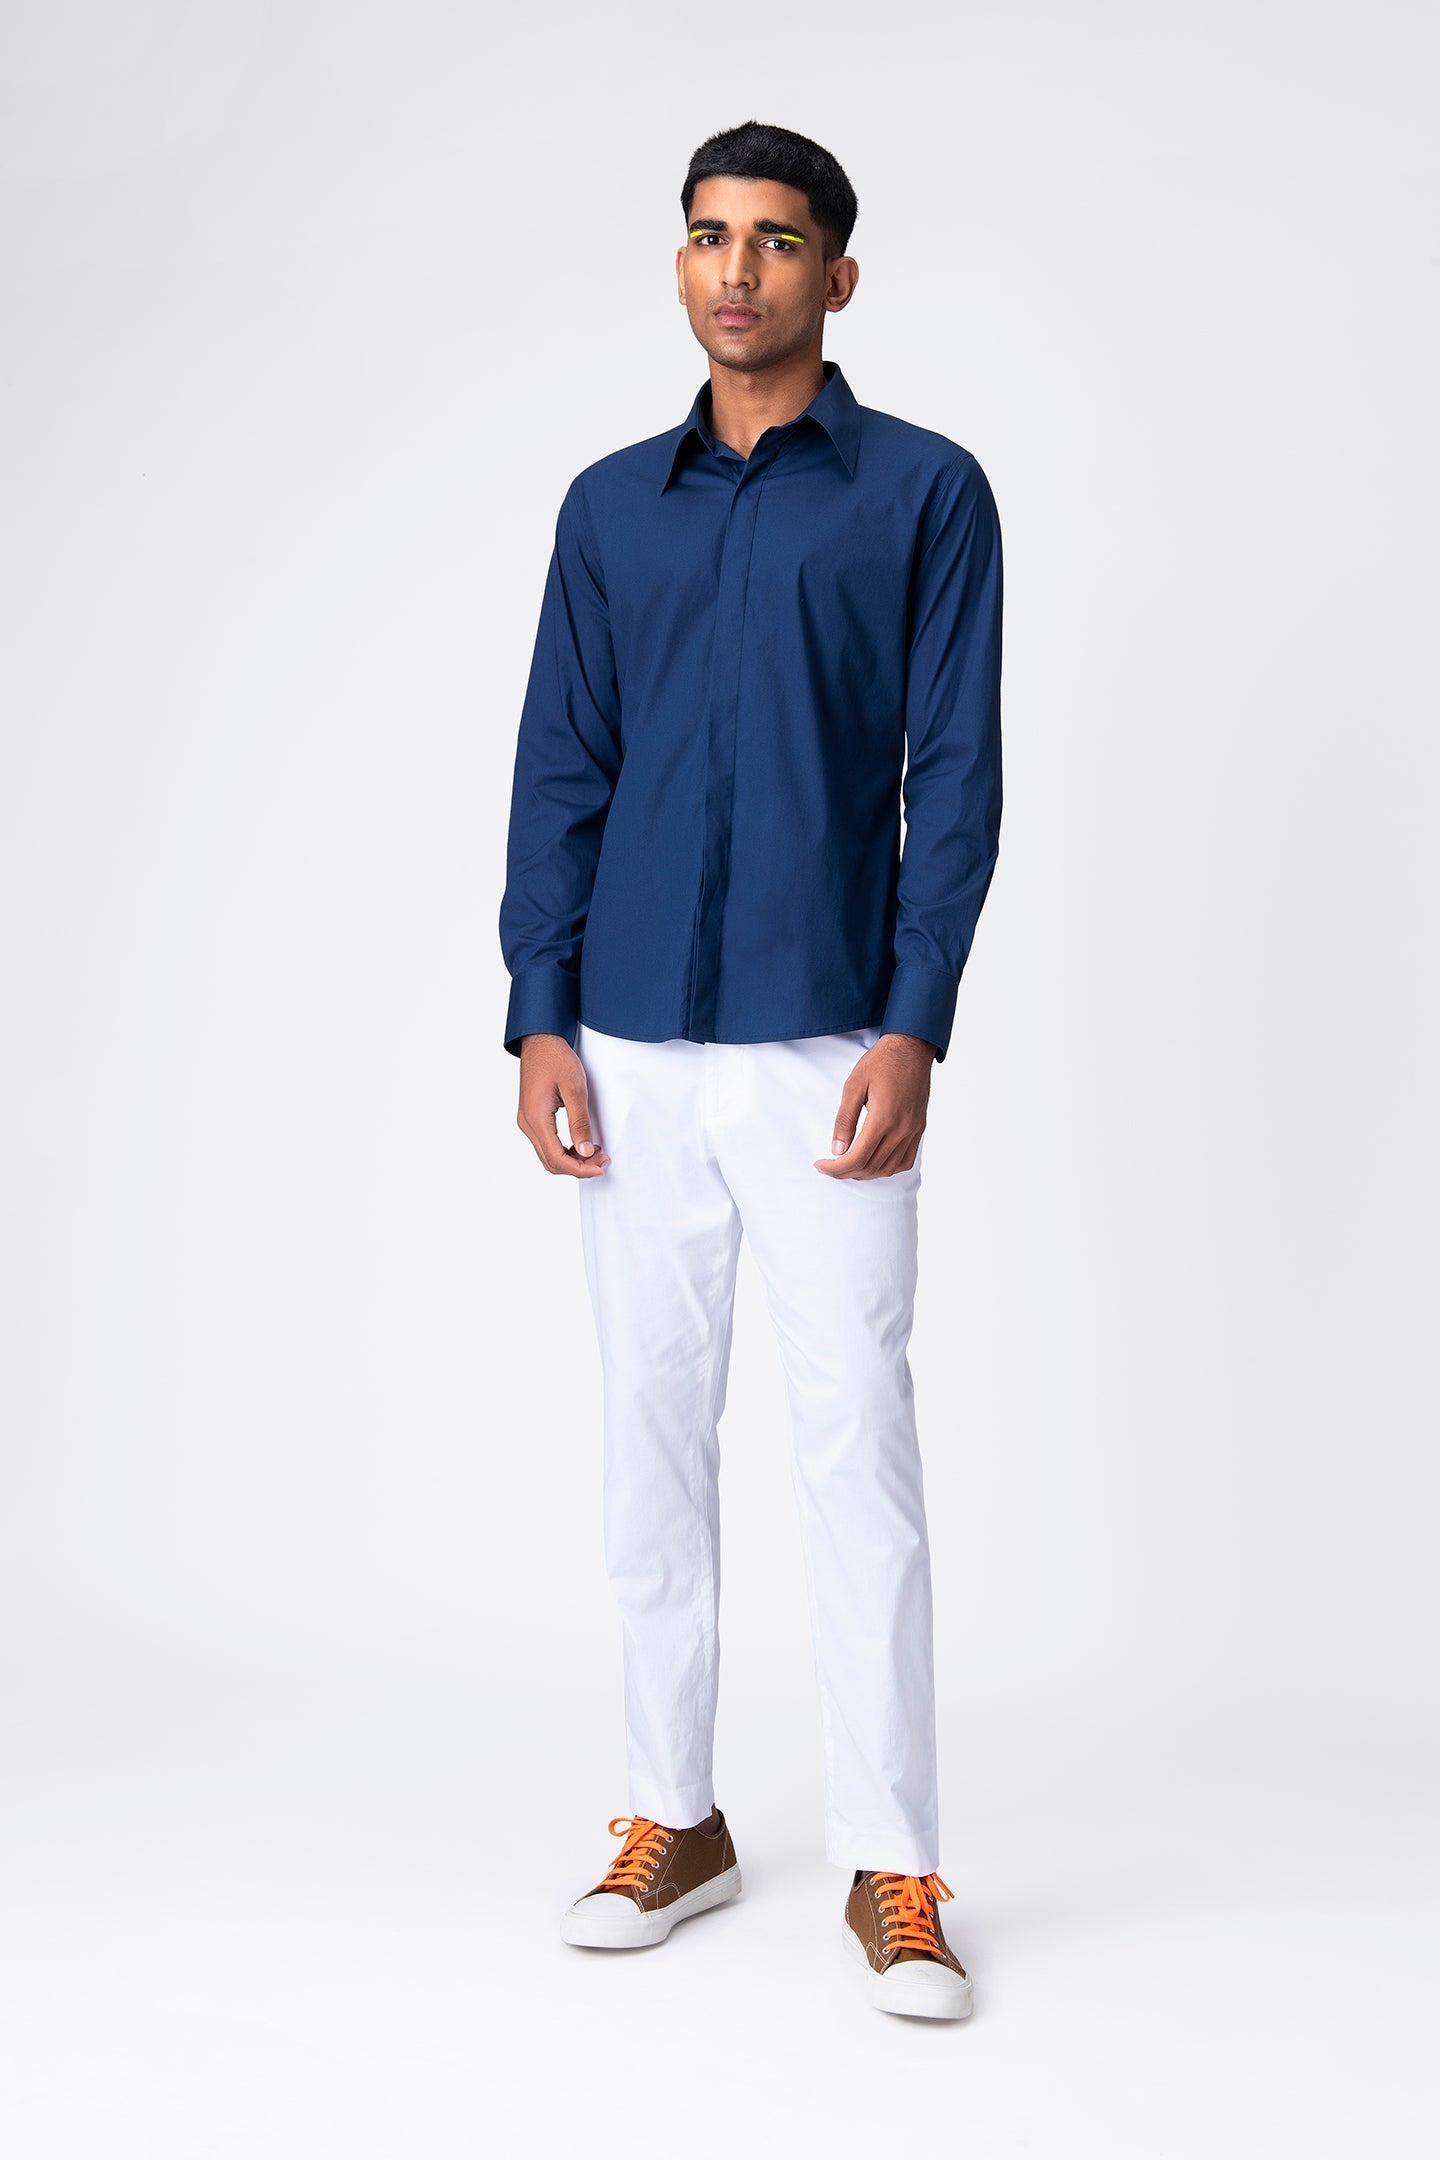 shirt-with-concealed-placket - Genes online store 2020